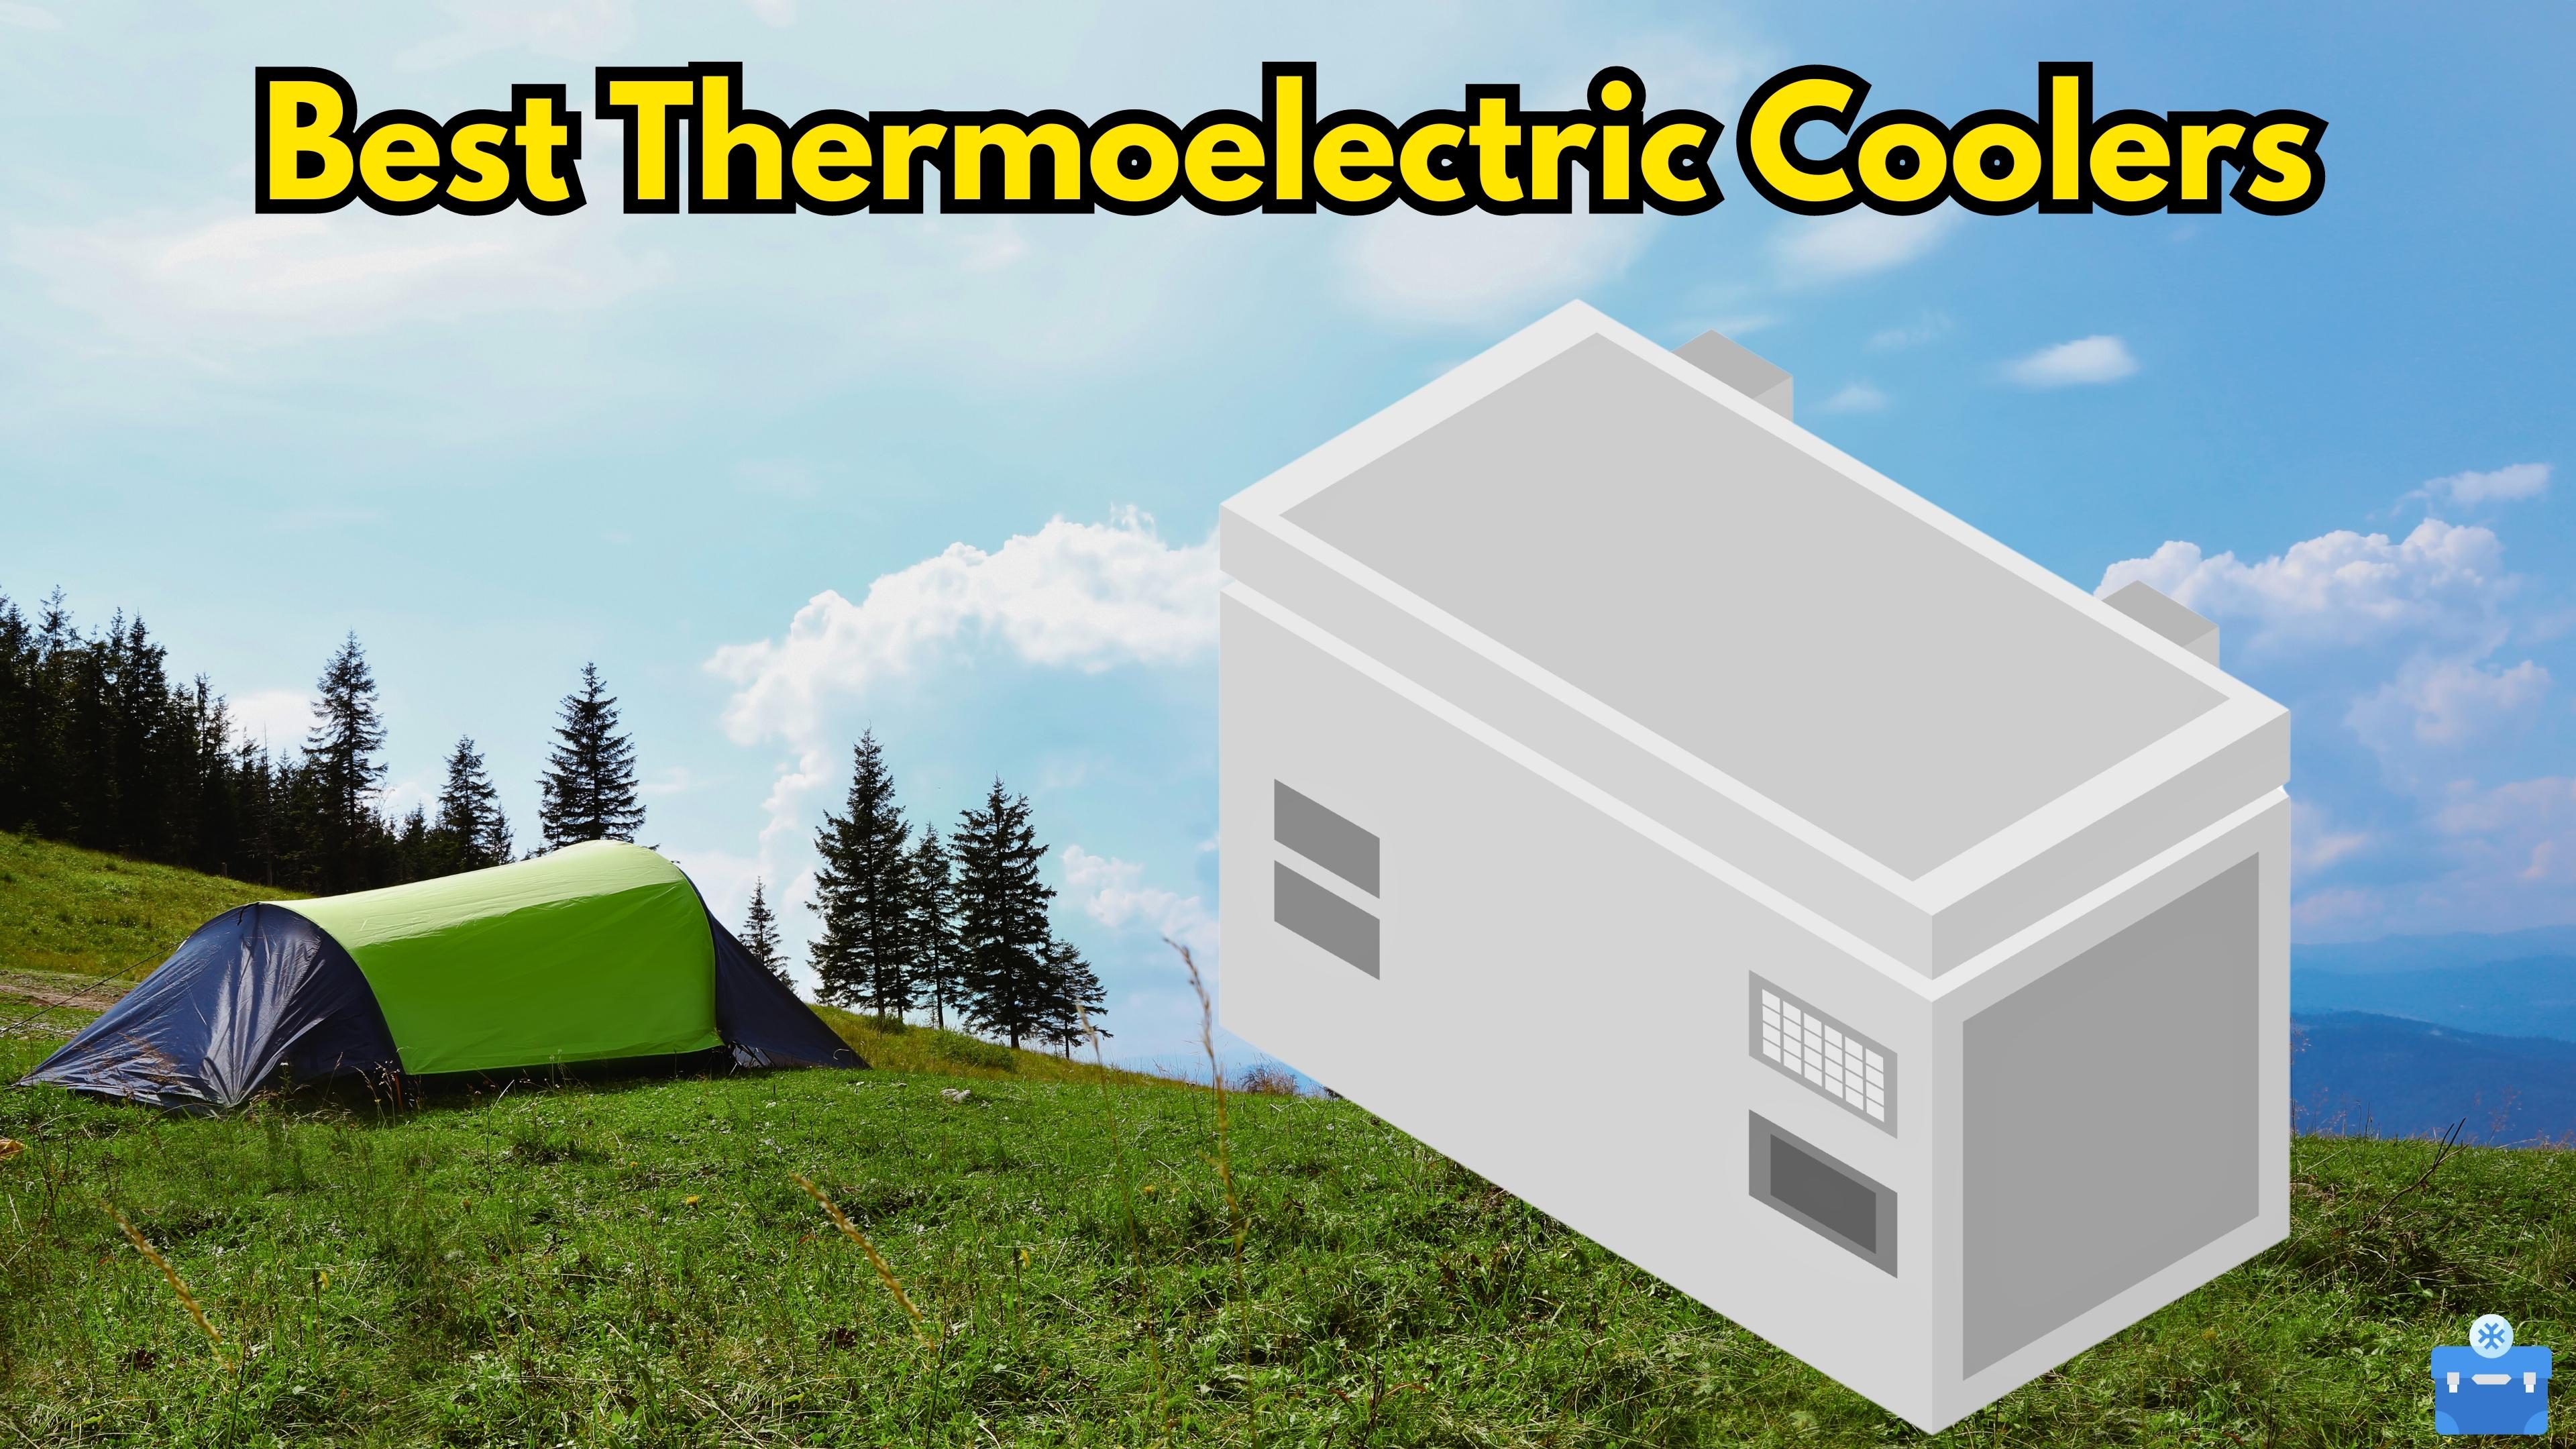 Best Thermoelectric Coolers: Top 6 Of 2023